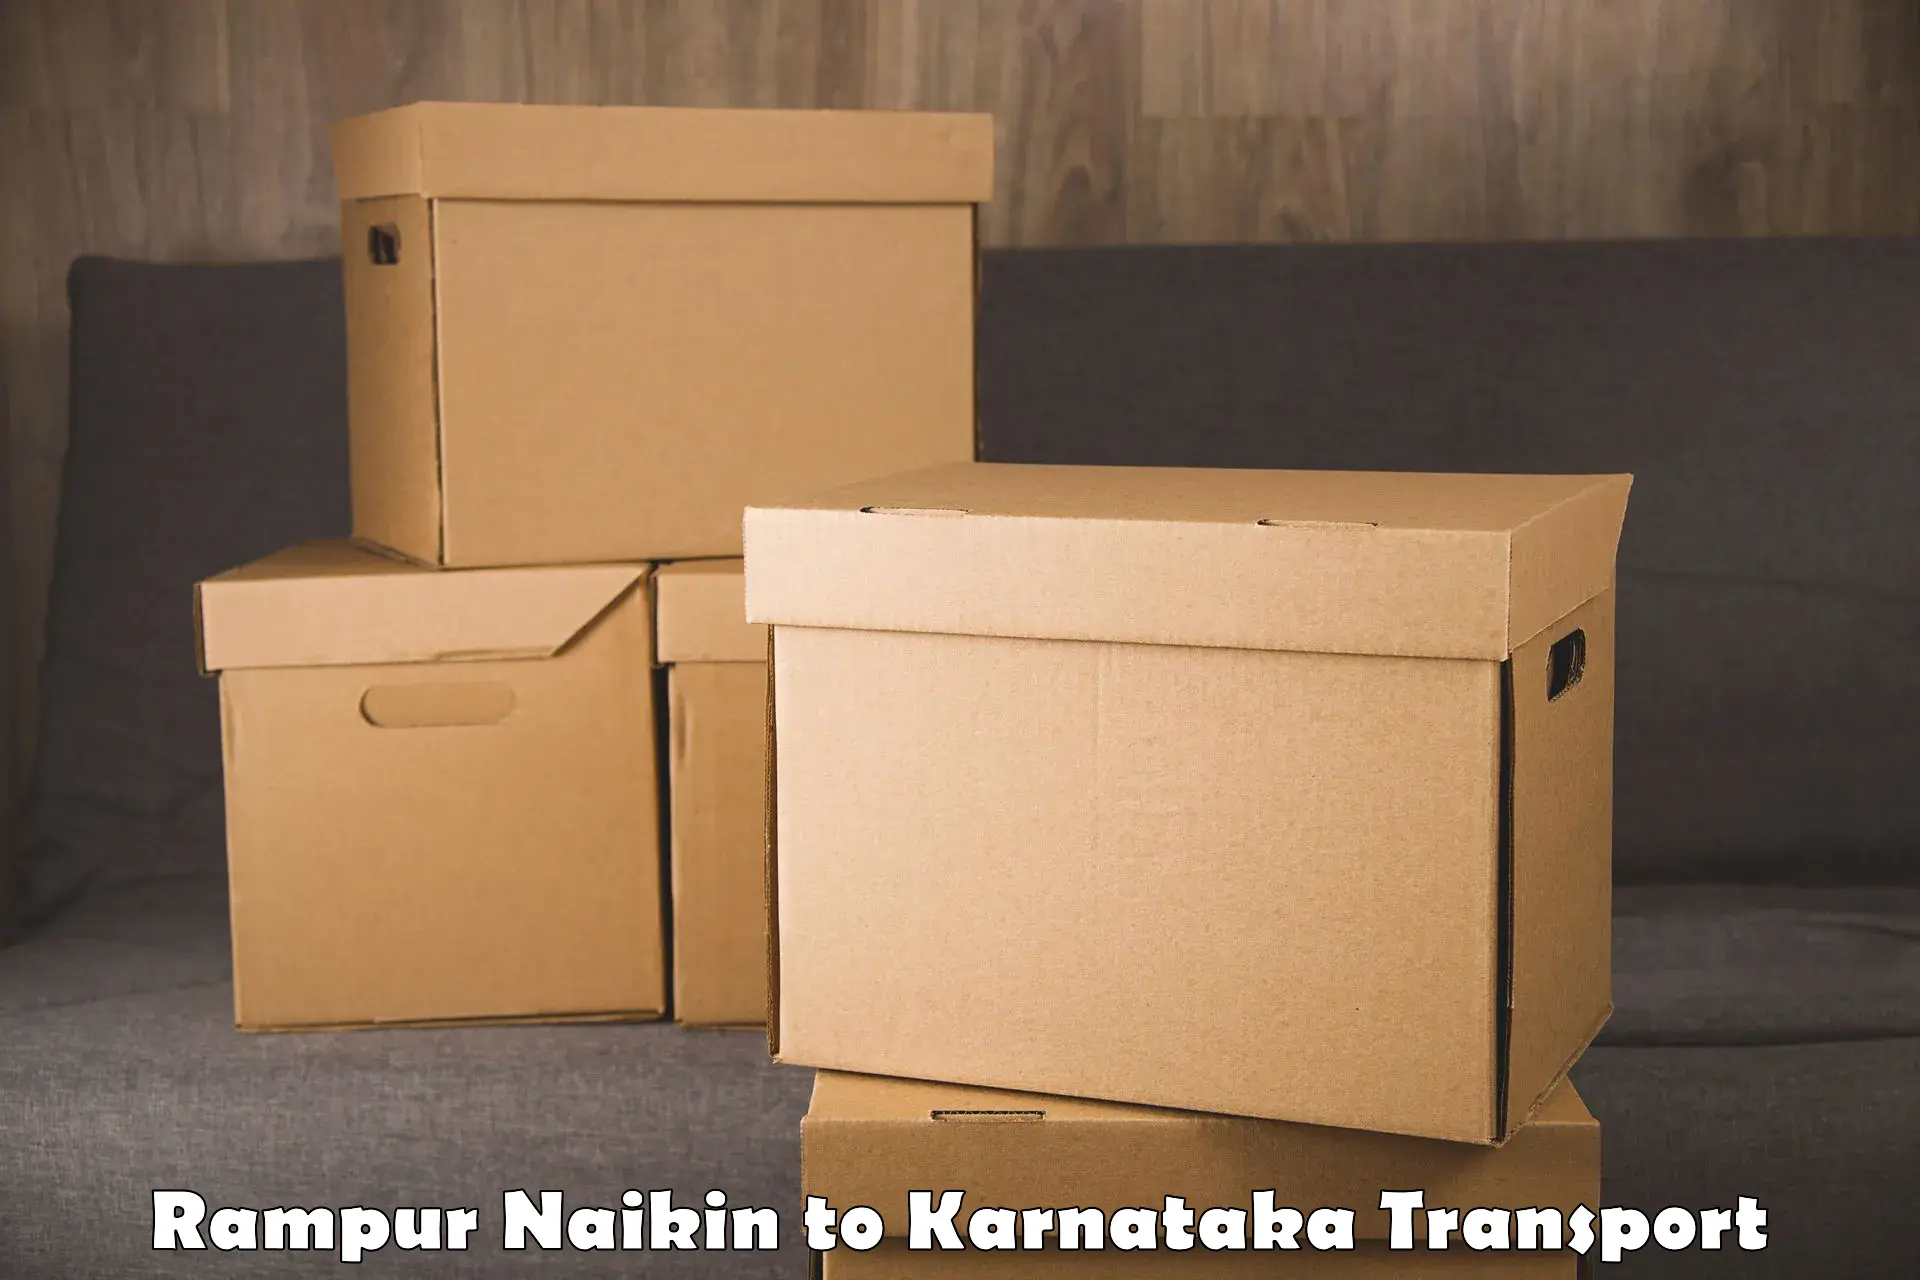 Road transport online services Rampur Naikin to Manipal